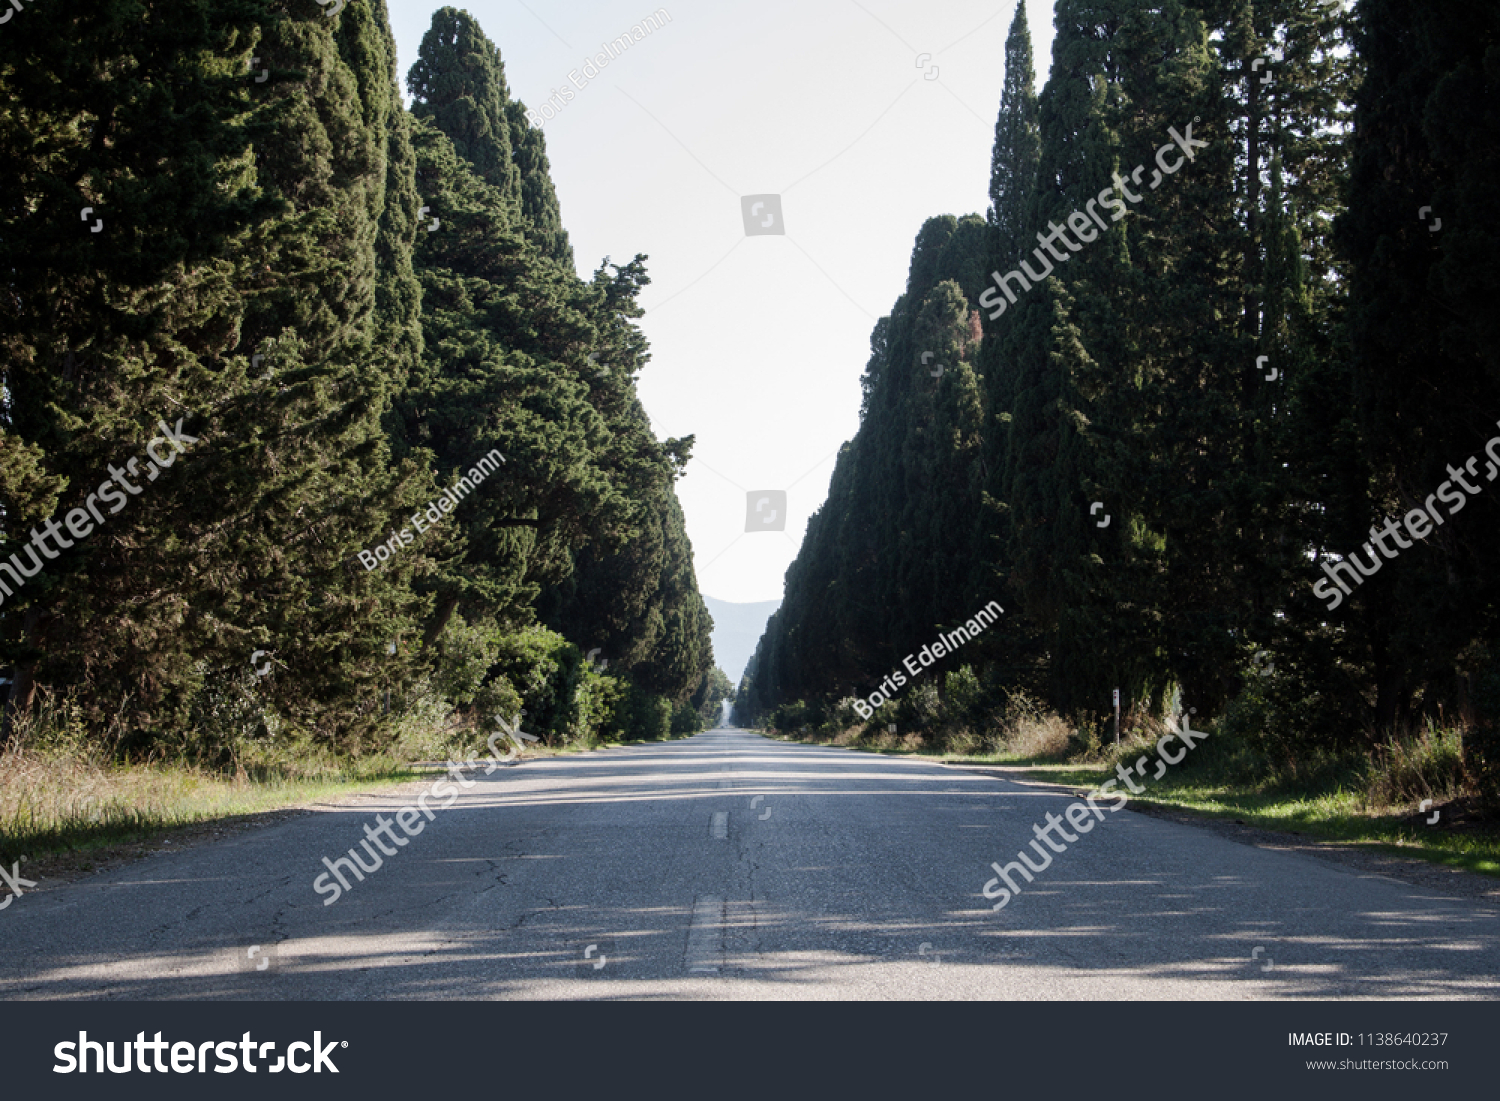 Alley of cypresses in Bolgheri, Tuscany, Italy #1138640237